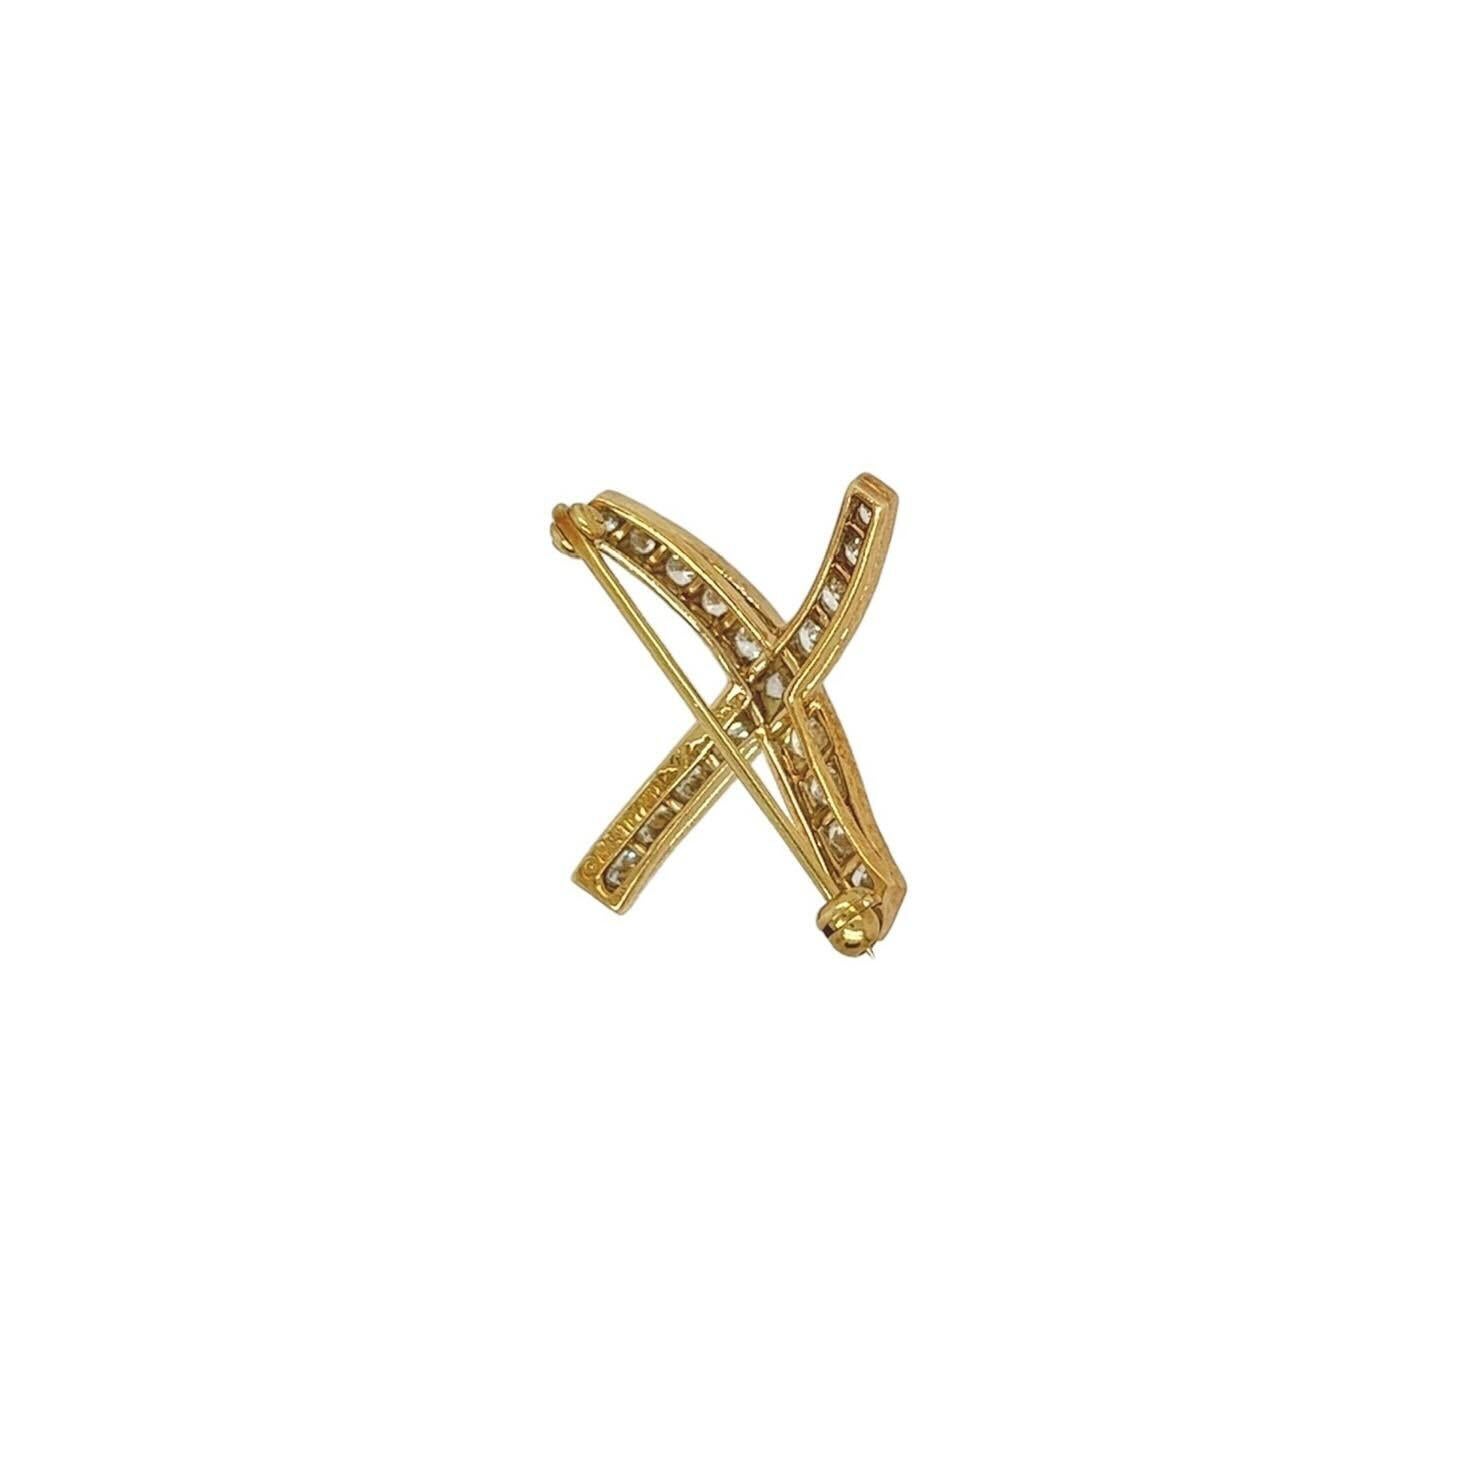 An 18 karat yellow gold and diamond brooch, Paloma Picasso, Tiffany & Co., circa 1984.  The “X Kiss” brooch designed as the letter x set with eighteen (18) round brilliant cut diamonds.  Total diamond weight approximately 1.22 carats.  Length